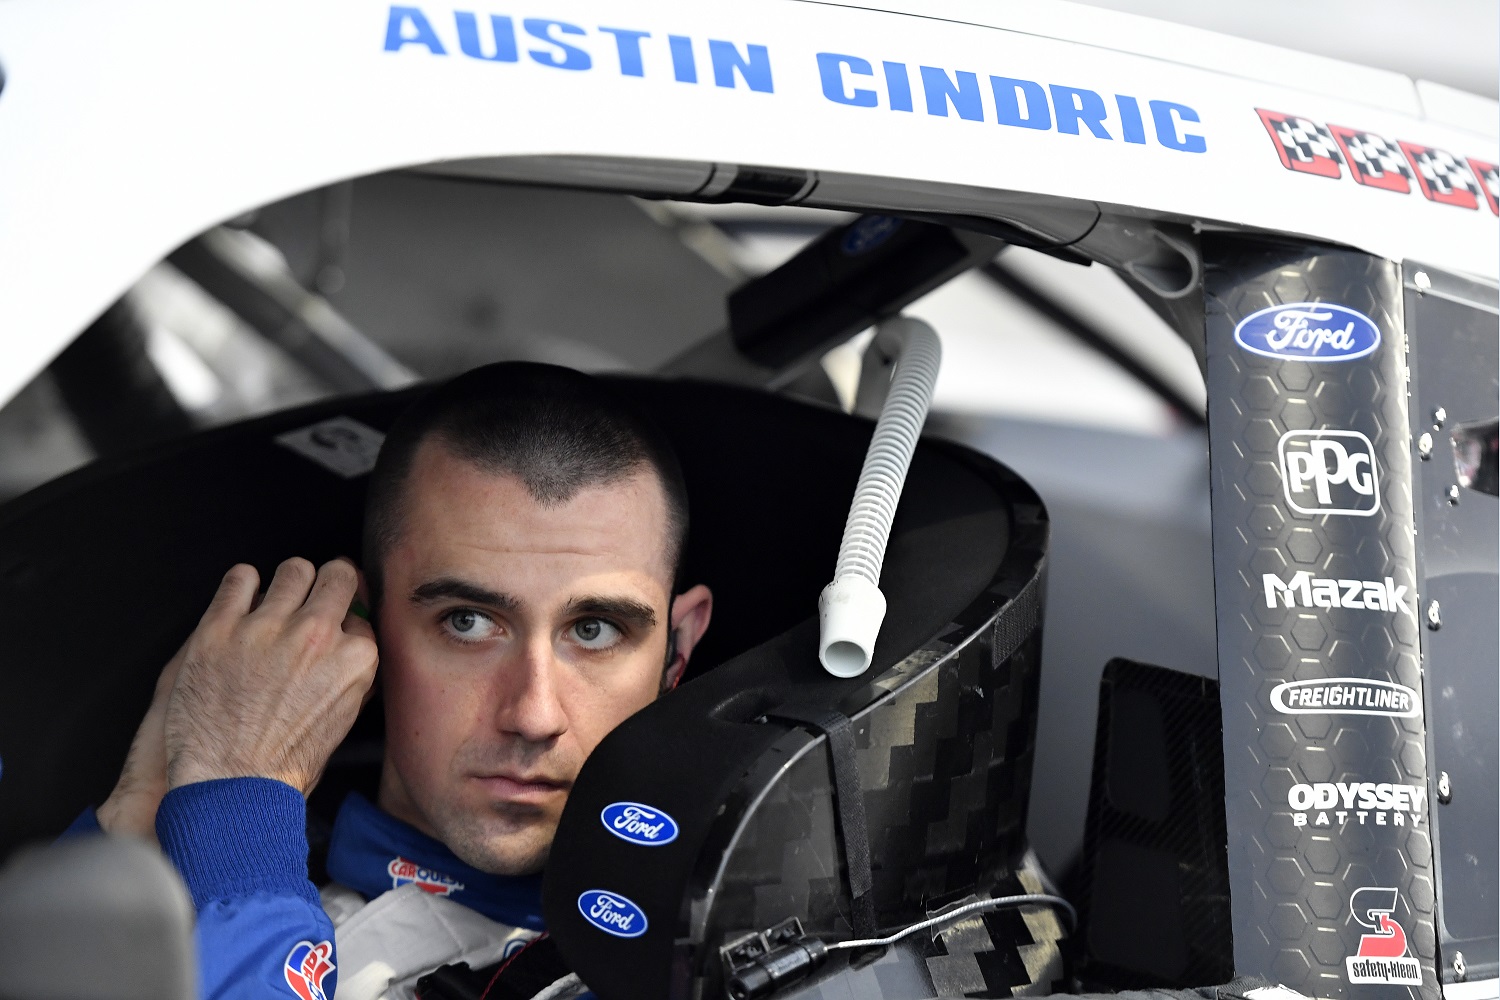 Austin Cindric prepares for the NASCAR Xfinity Series Dead on Tools 250 at Martinsville Speedway on Oct. 30, 2021 in Martinsville, Virginia.